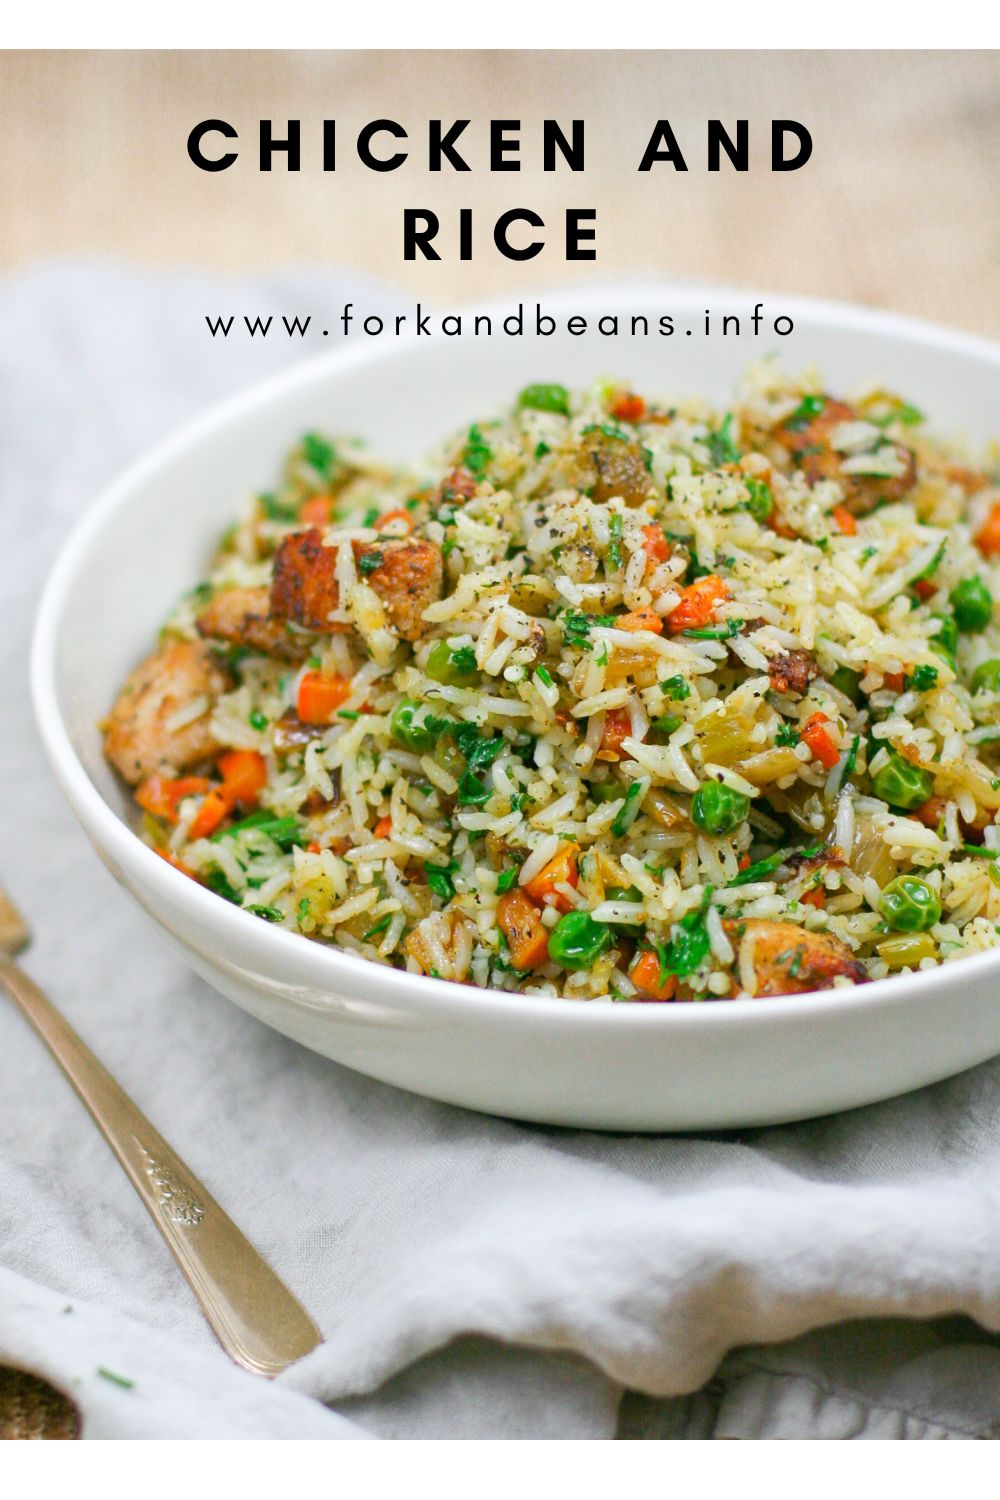 EASY HERBED CHICKEN AND RICE